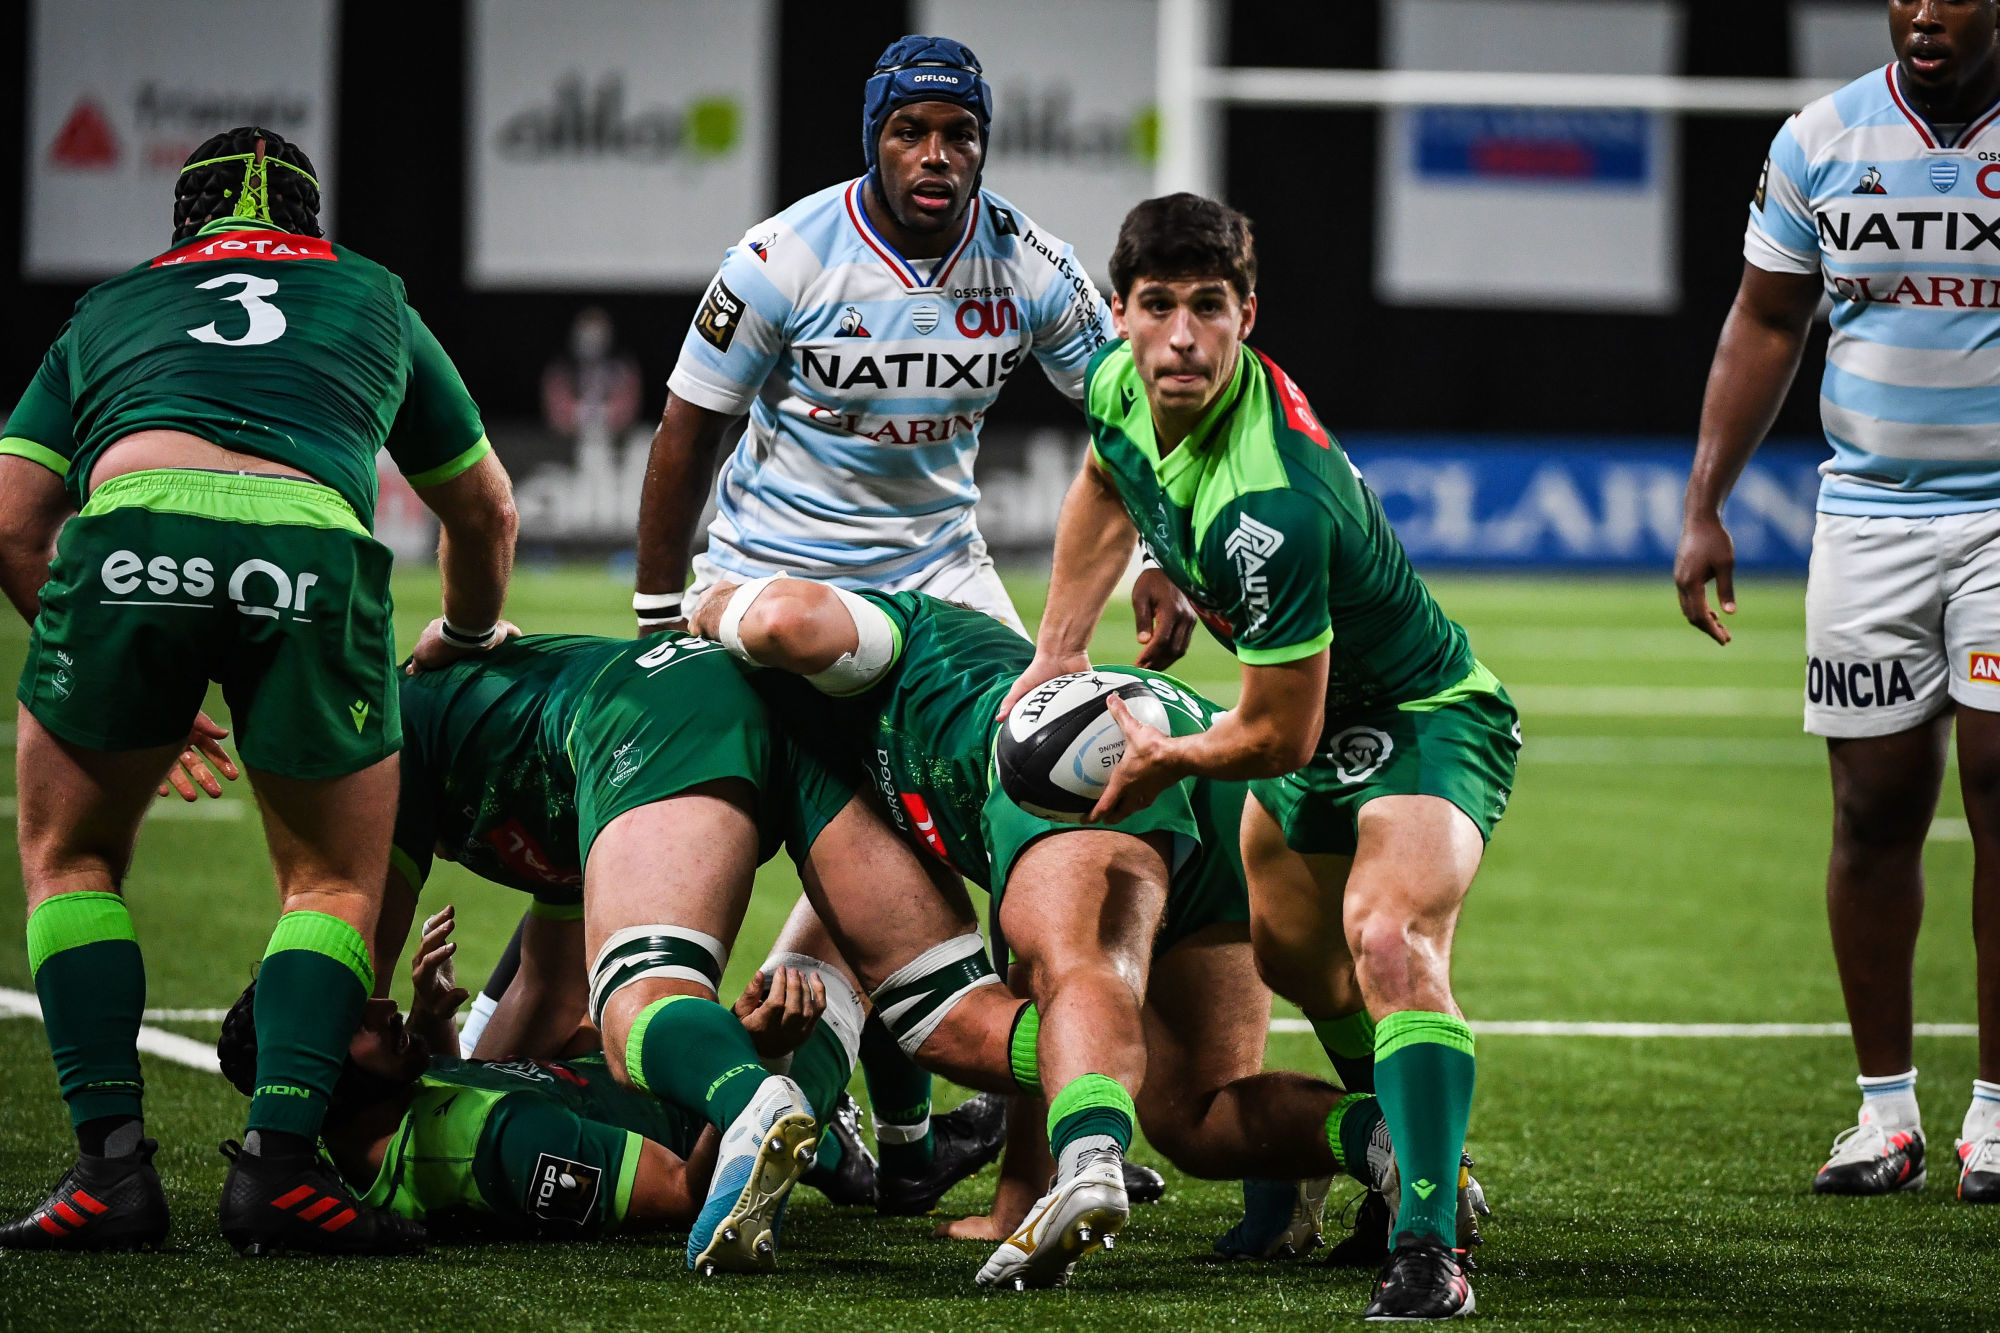 Thibault DAUBAGNA of Pau during the Top 14 match between Racing 92 and Pau at Paris La Defense Arena on November 7, 2020 in Nanterre, France. (Photo by Matthieu Mirville/Icon Sport) - Thibault DAUBAGNA - Paris La Defense Arena - Paris (France)